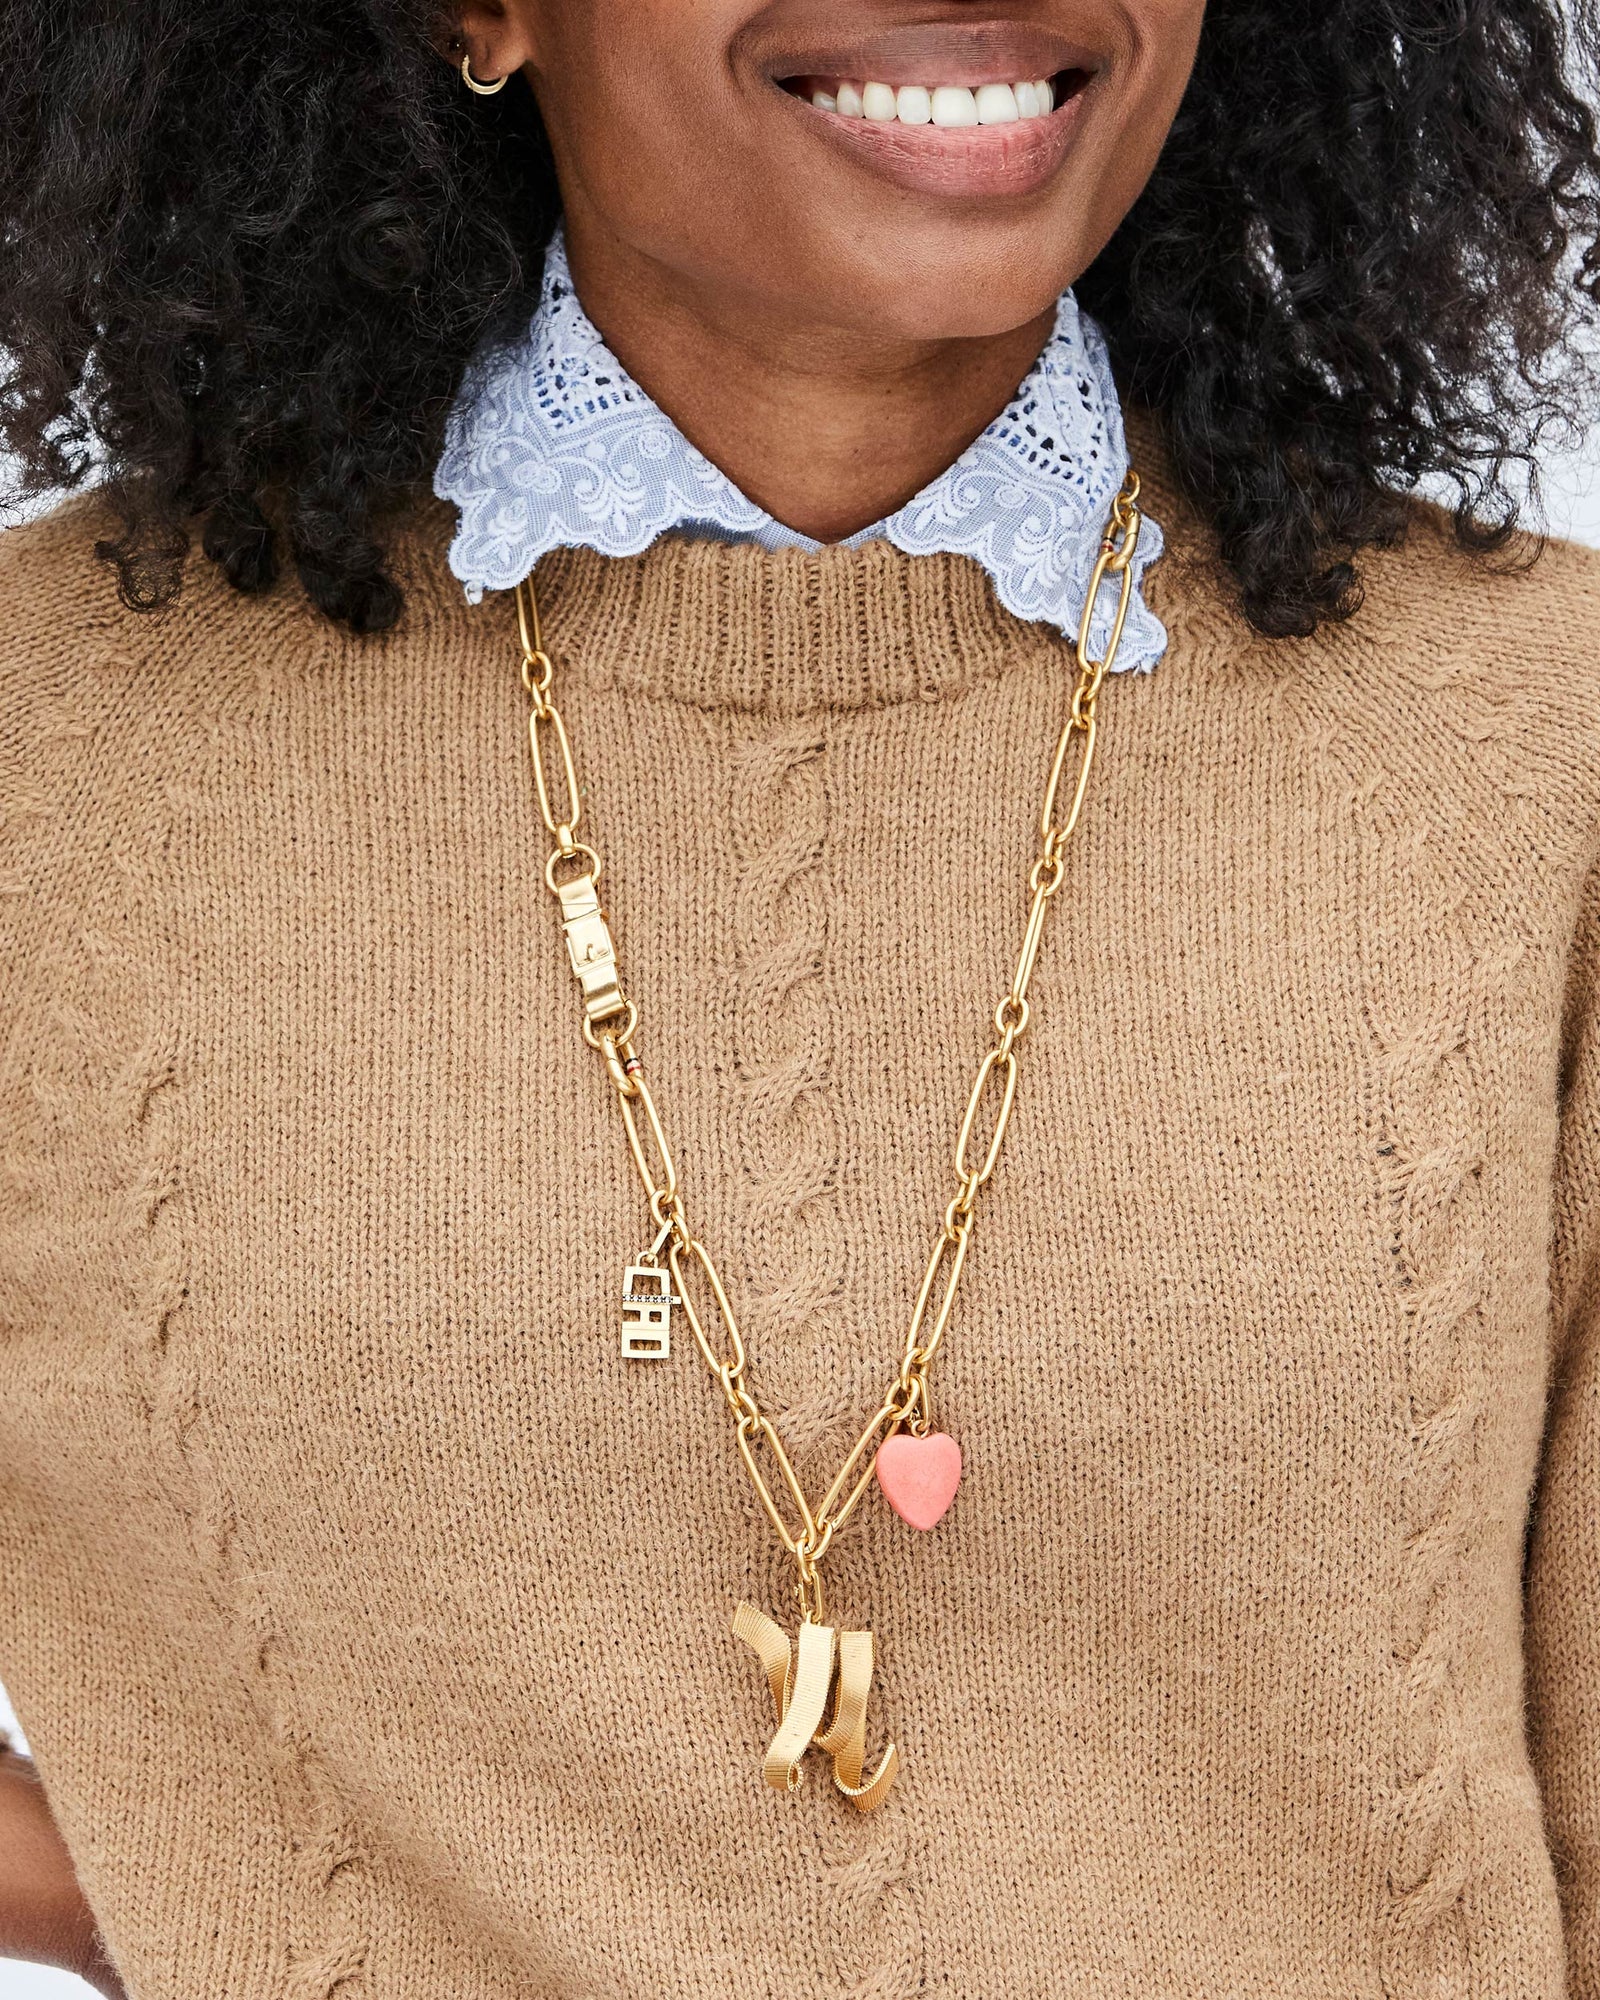 Mecca Wearing the Coral Stone Heart Charm with Other Charms on the Convertible Chain Charm Necklace